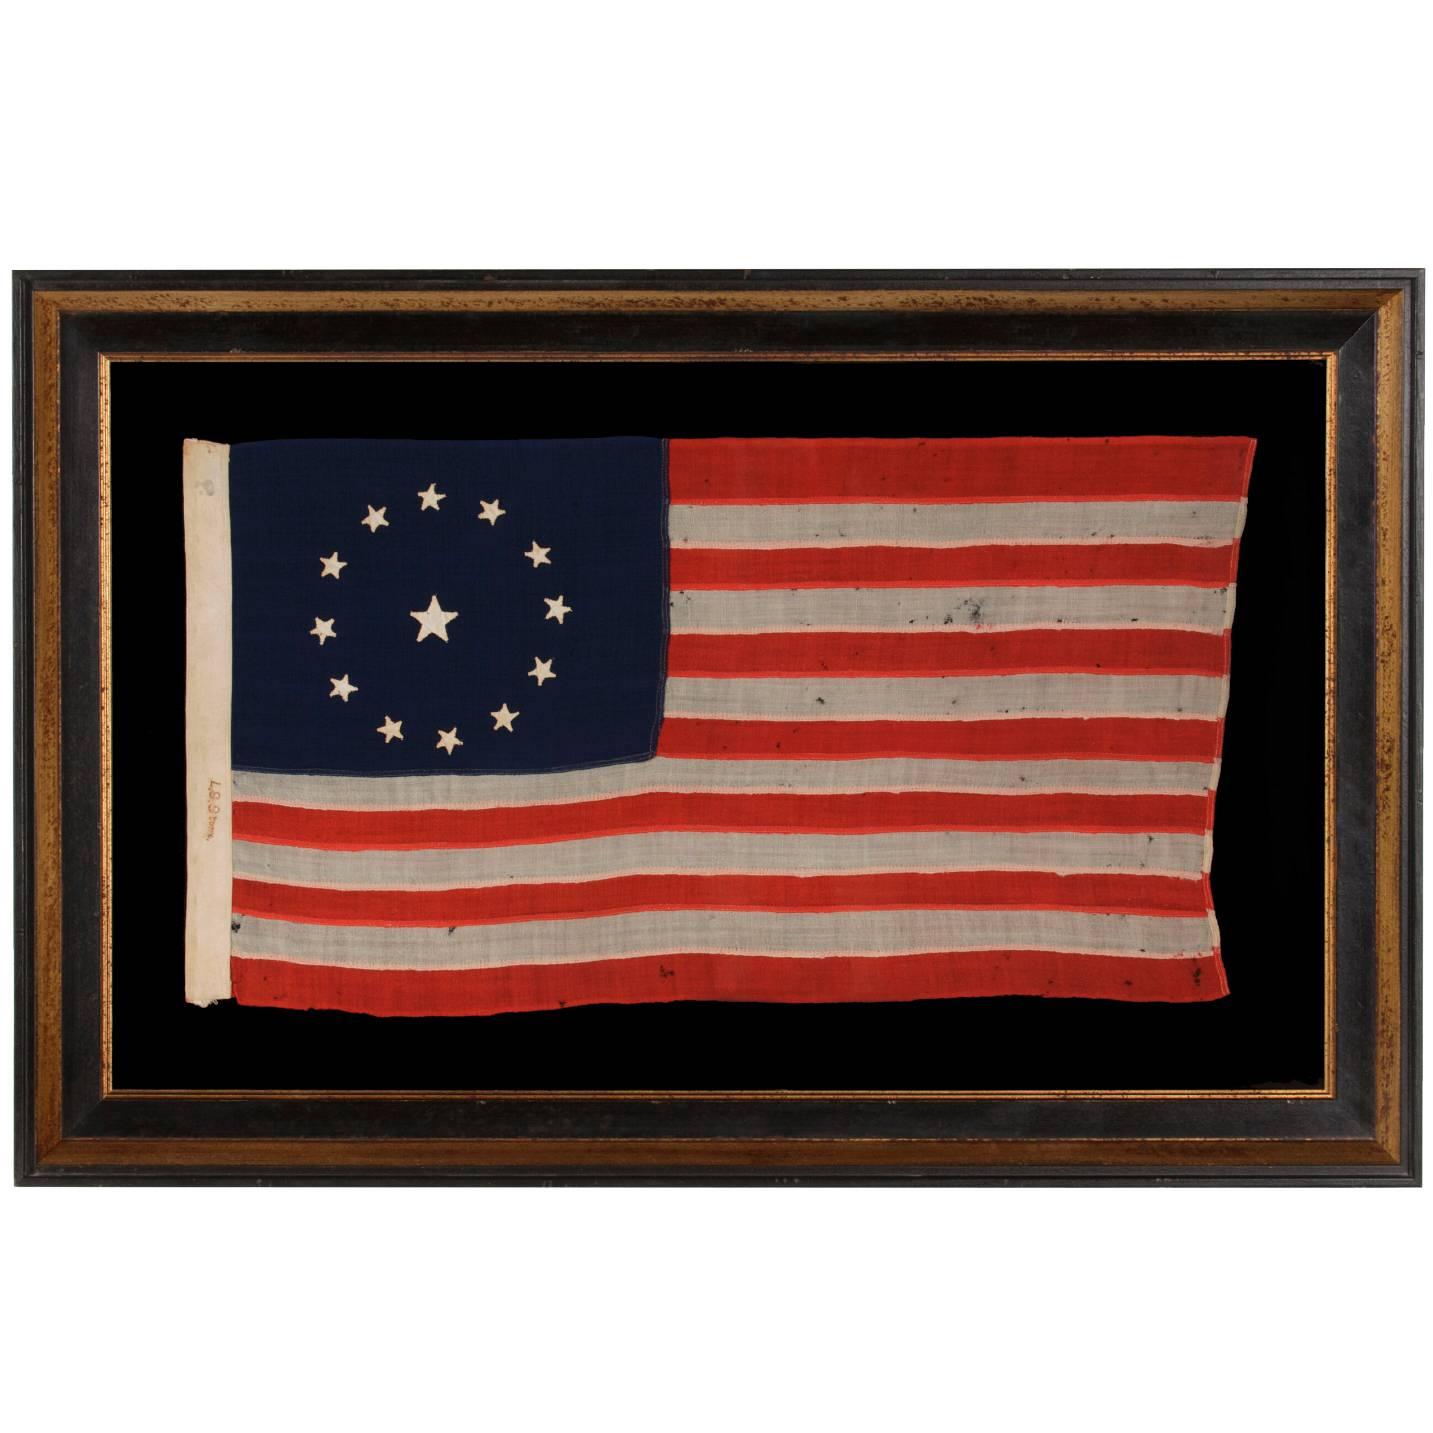 13 Star Flag with Stars in the 3rd Maryland Pattern